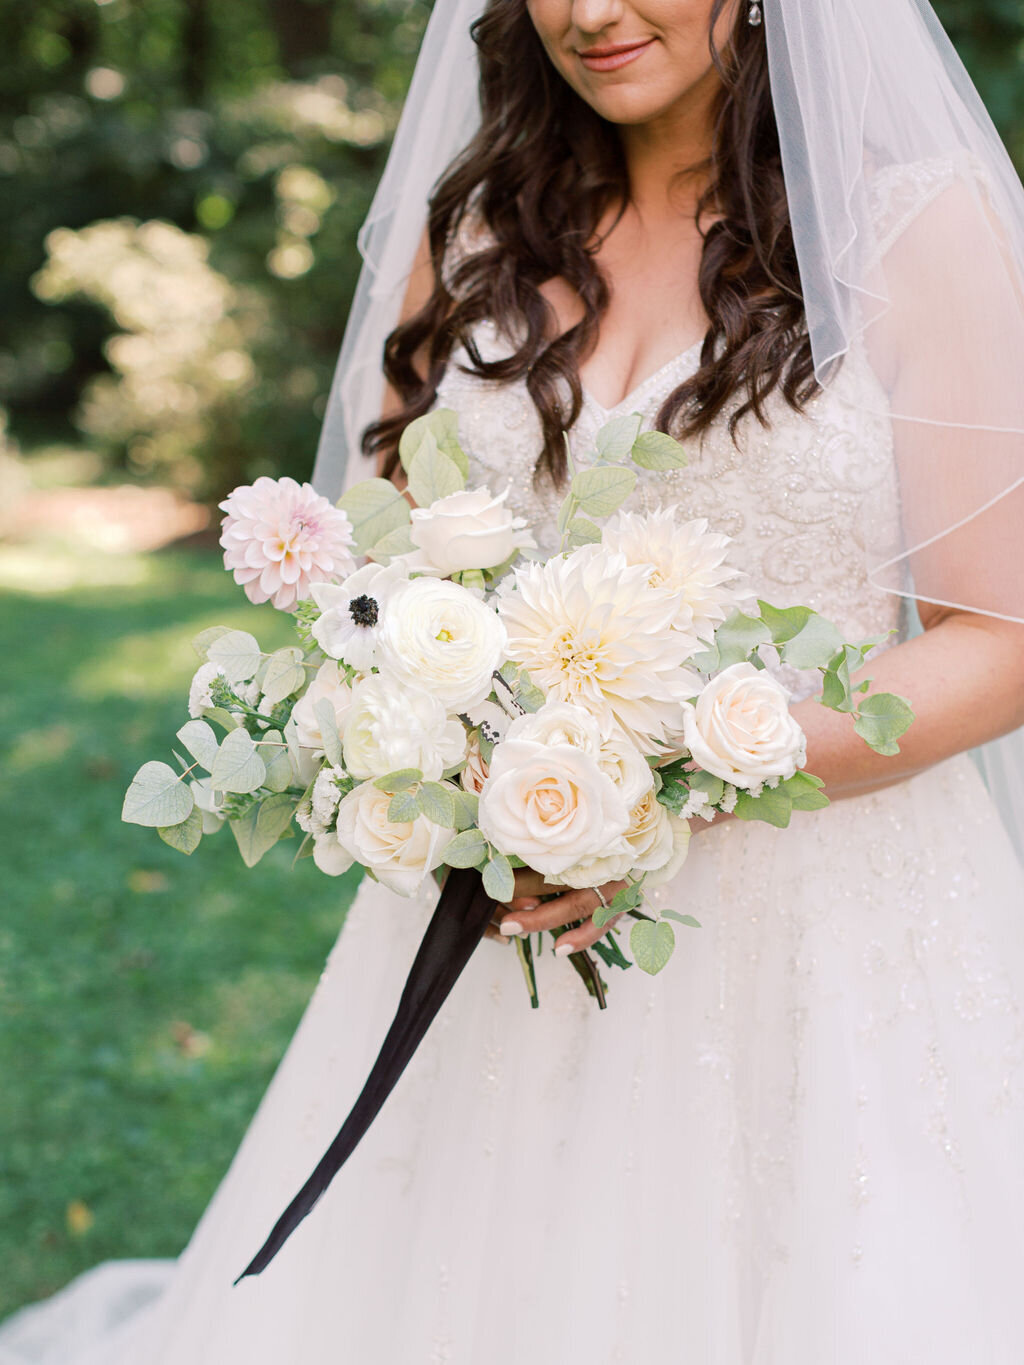 Kate Campbell Floral Fall Wedding Liriodendron Mansion by Molly Litchen11